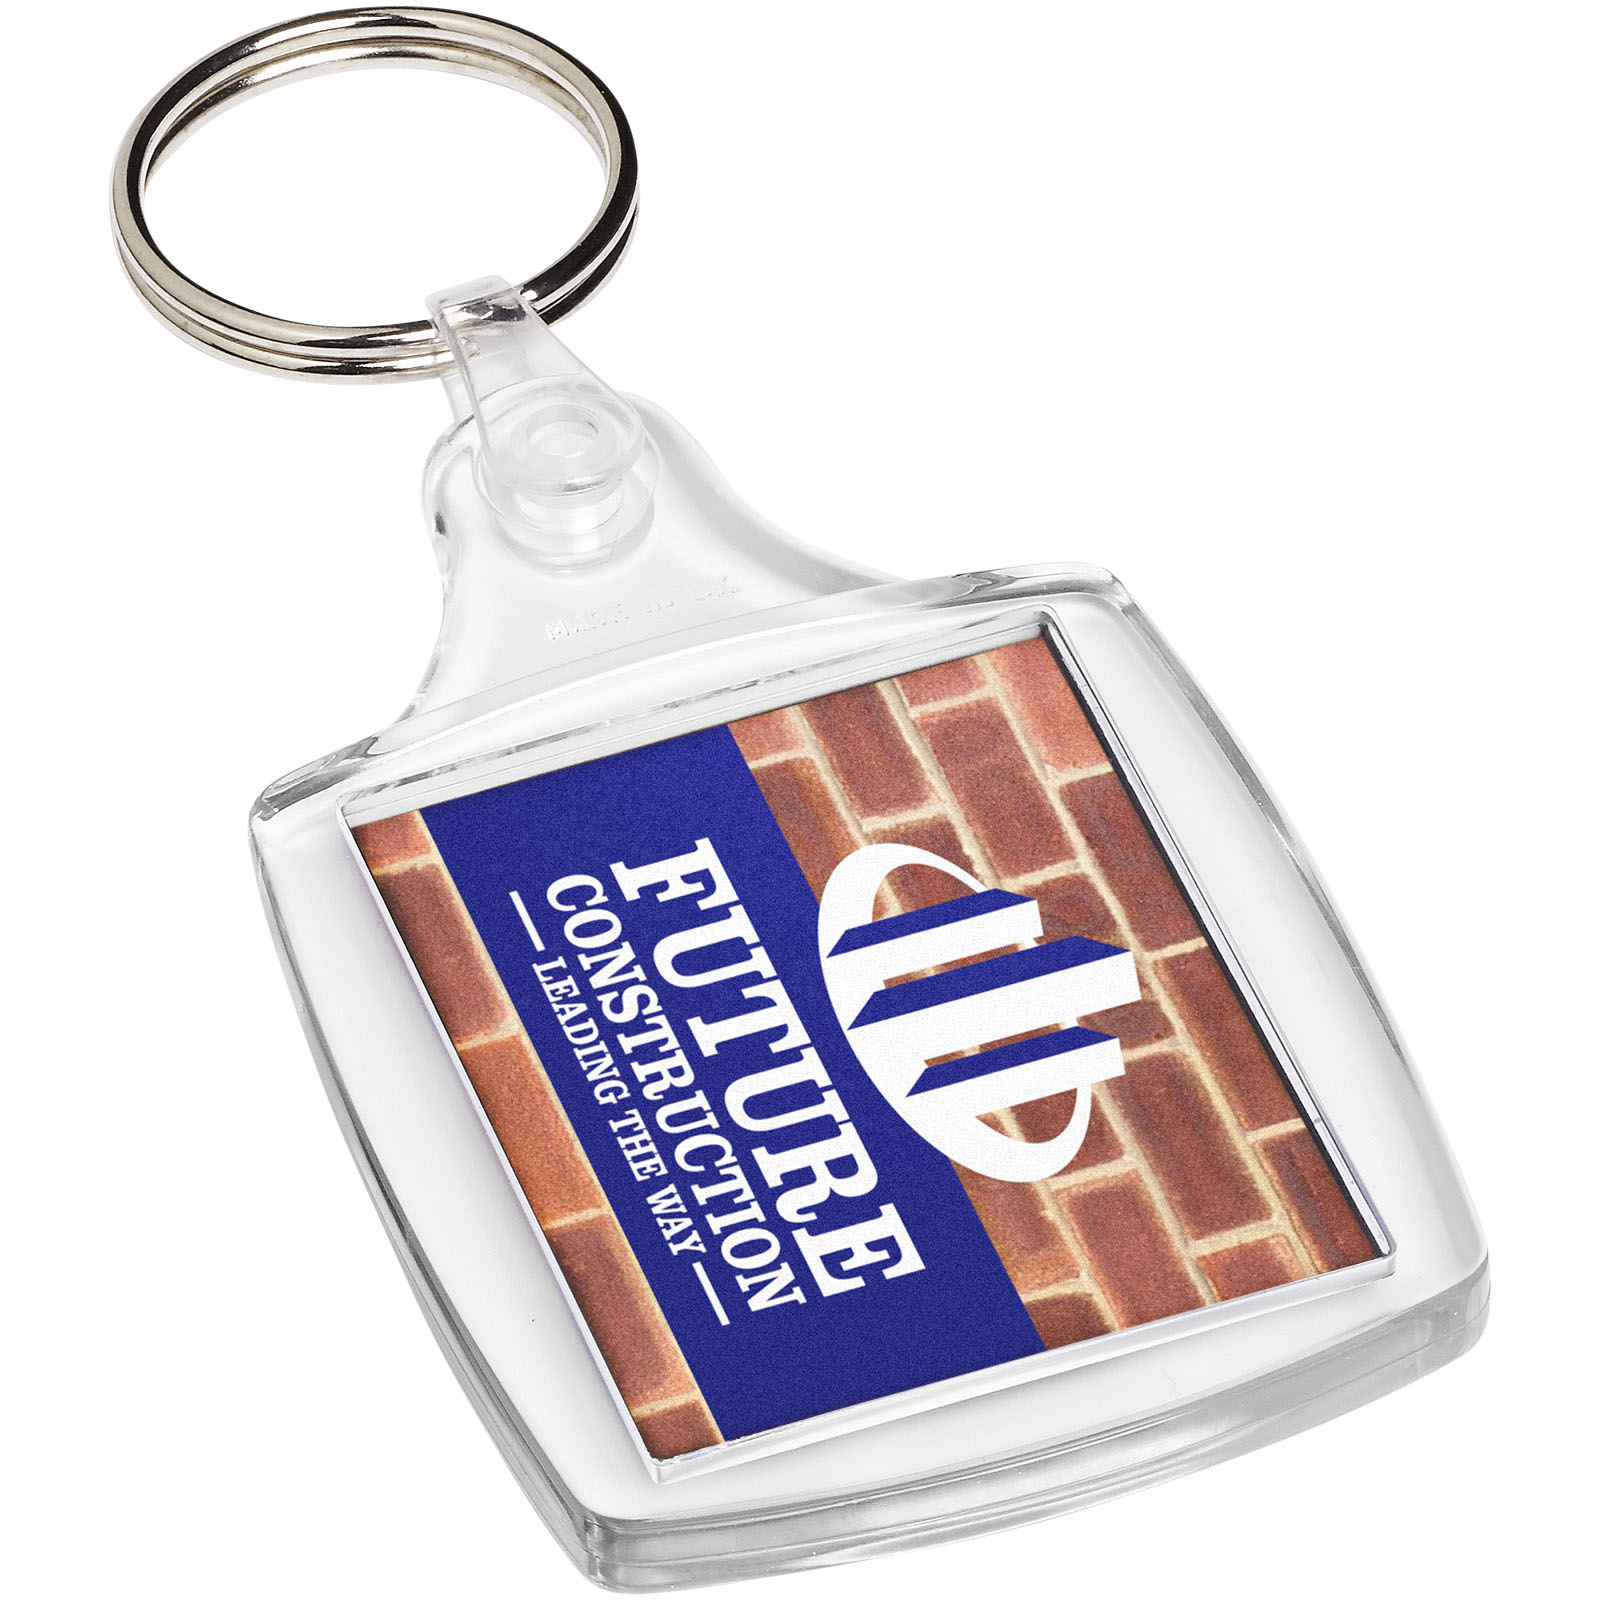 Clear View Keychain - Bourton-on-the-Water - Redmarley D'Abitot